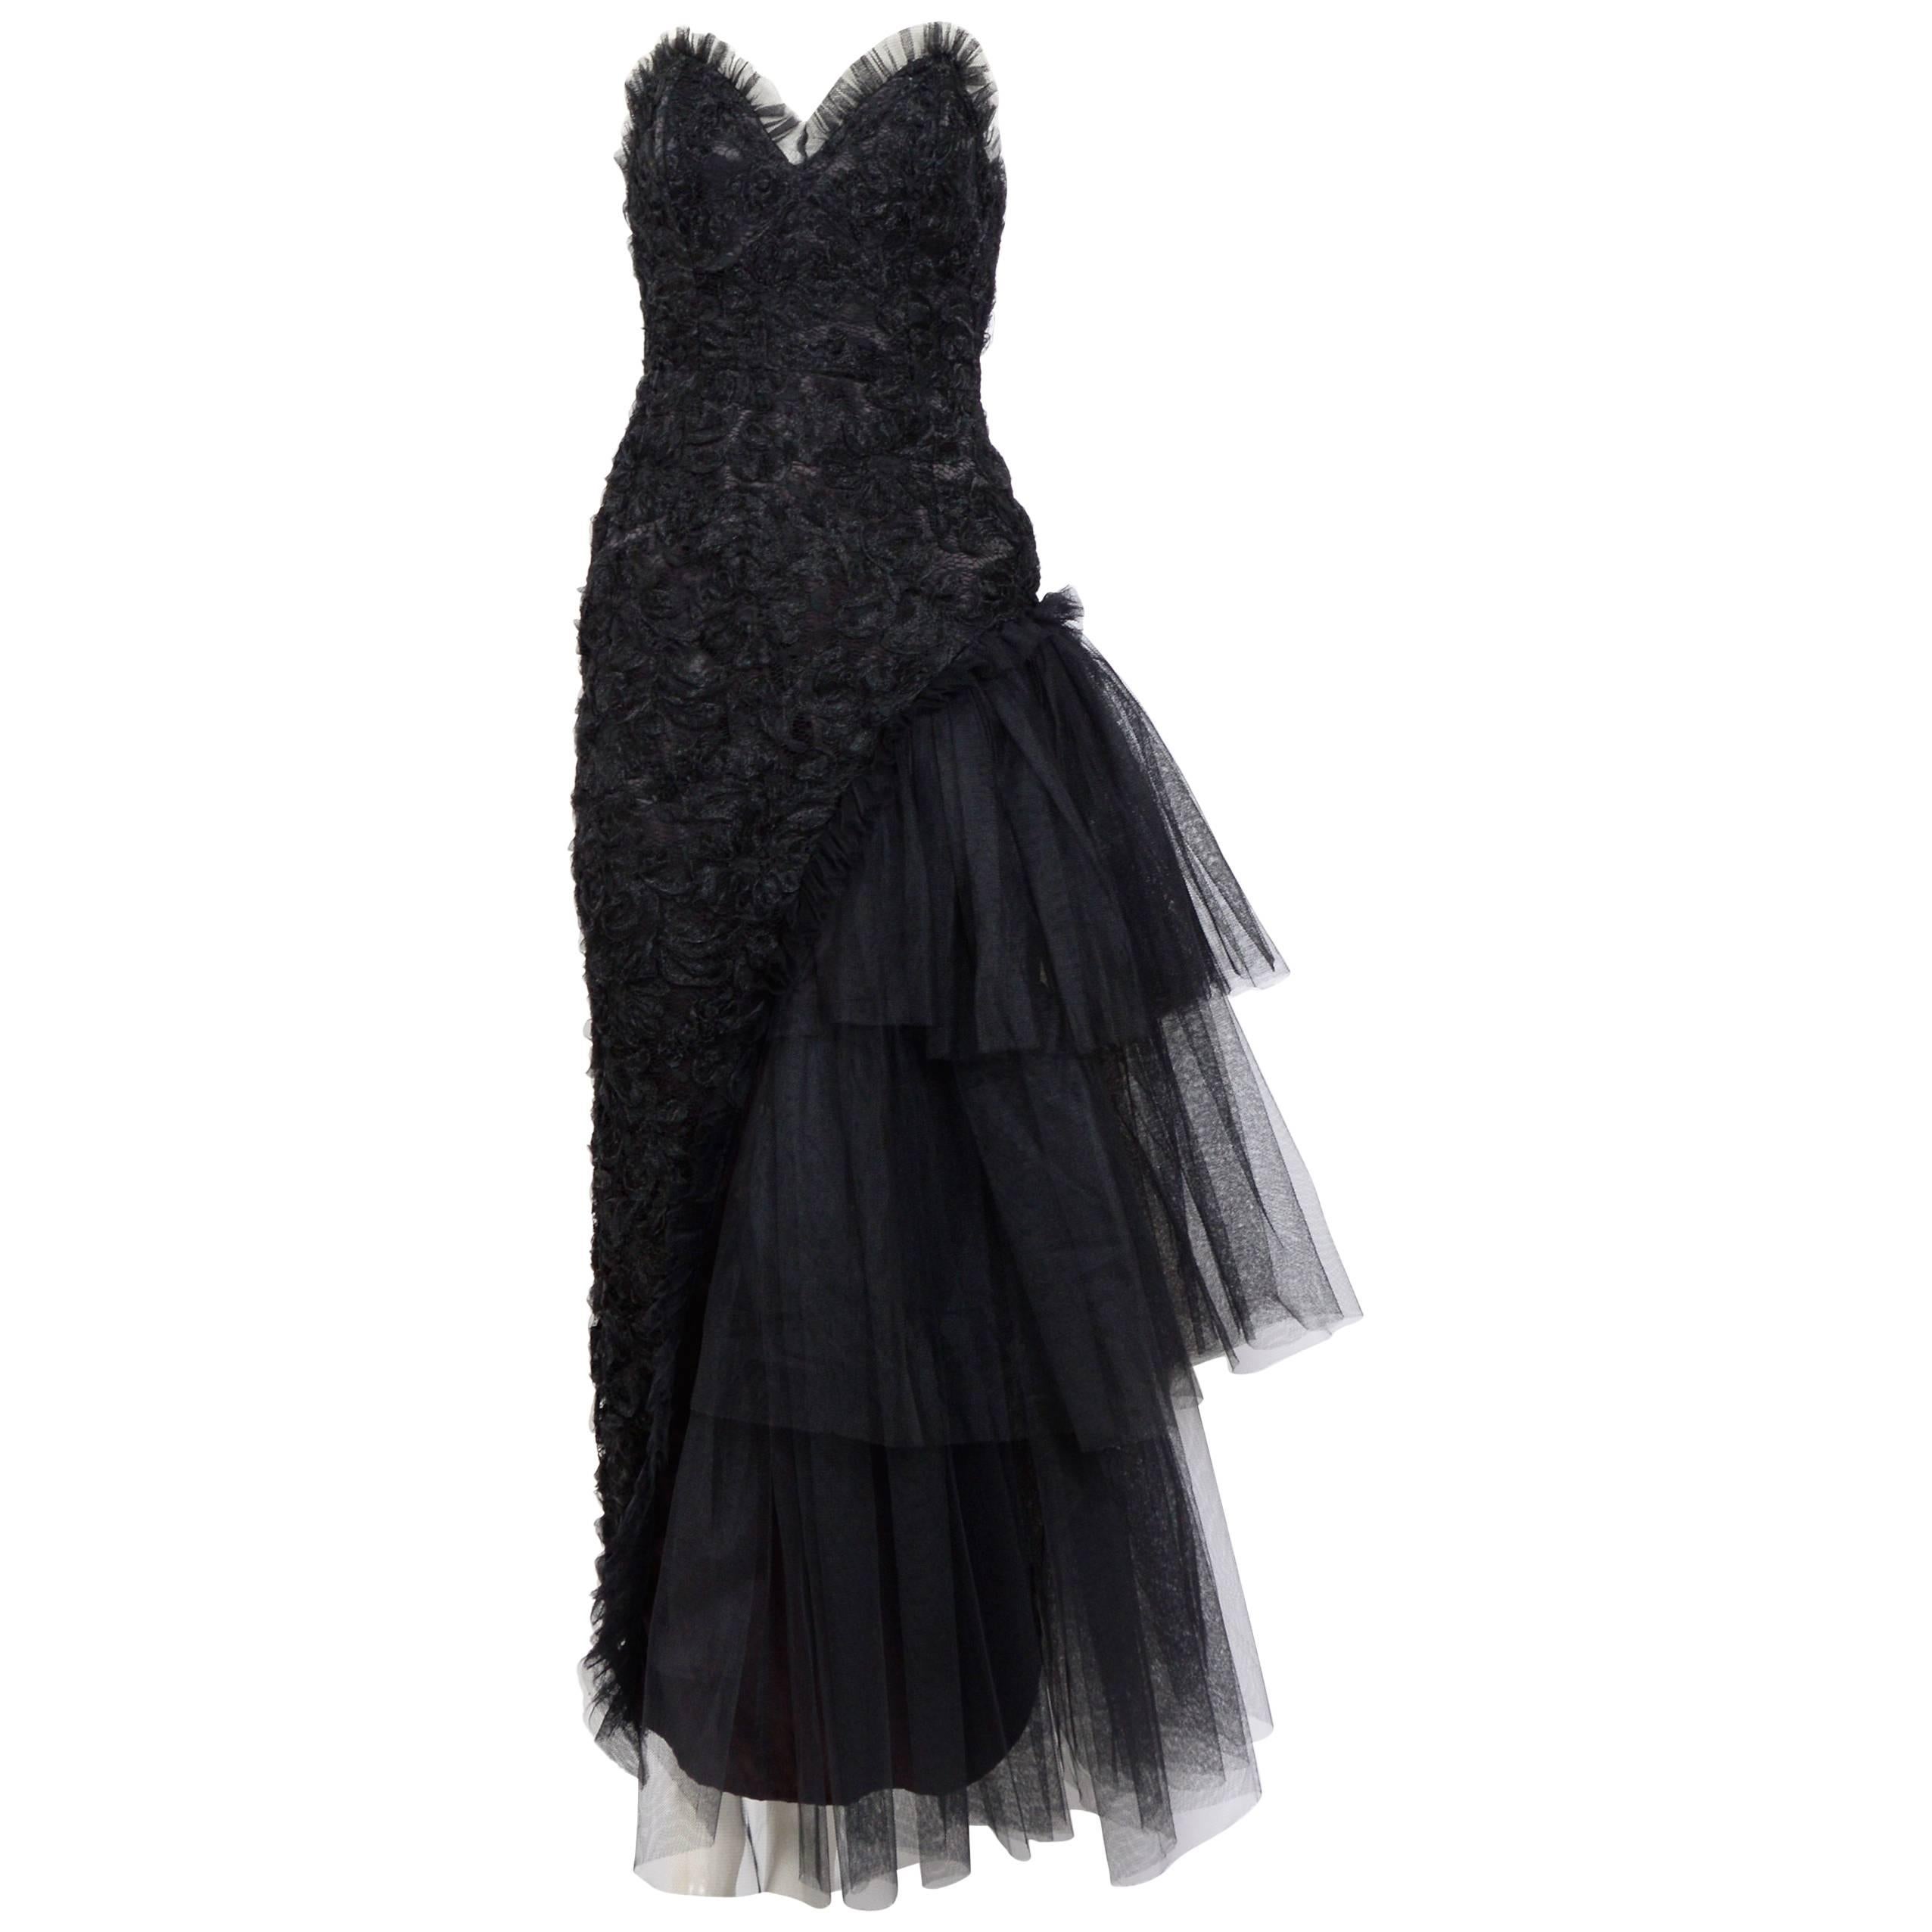 Yvan & Marzia 1980s Black Lace and Tulle Partydress